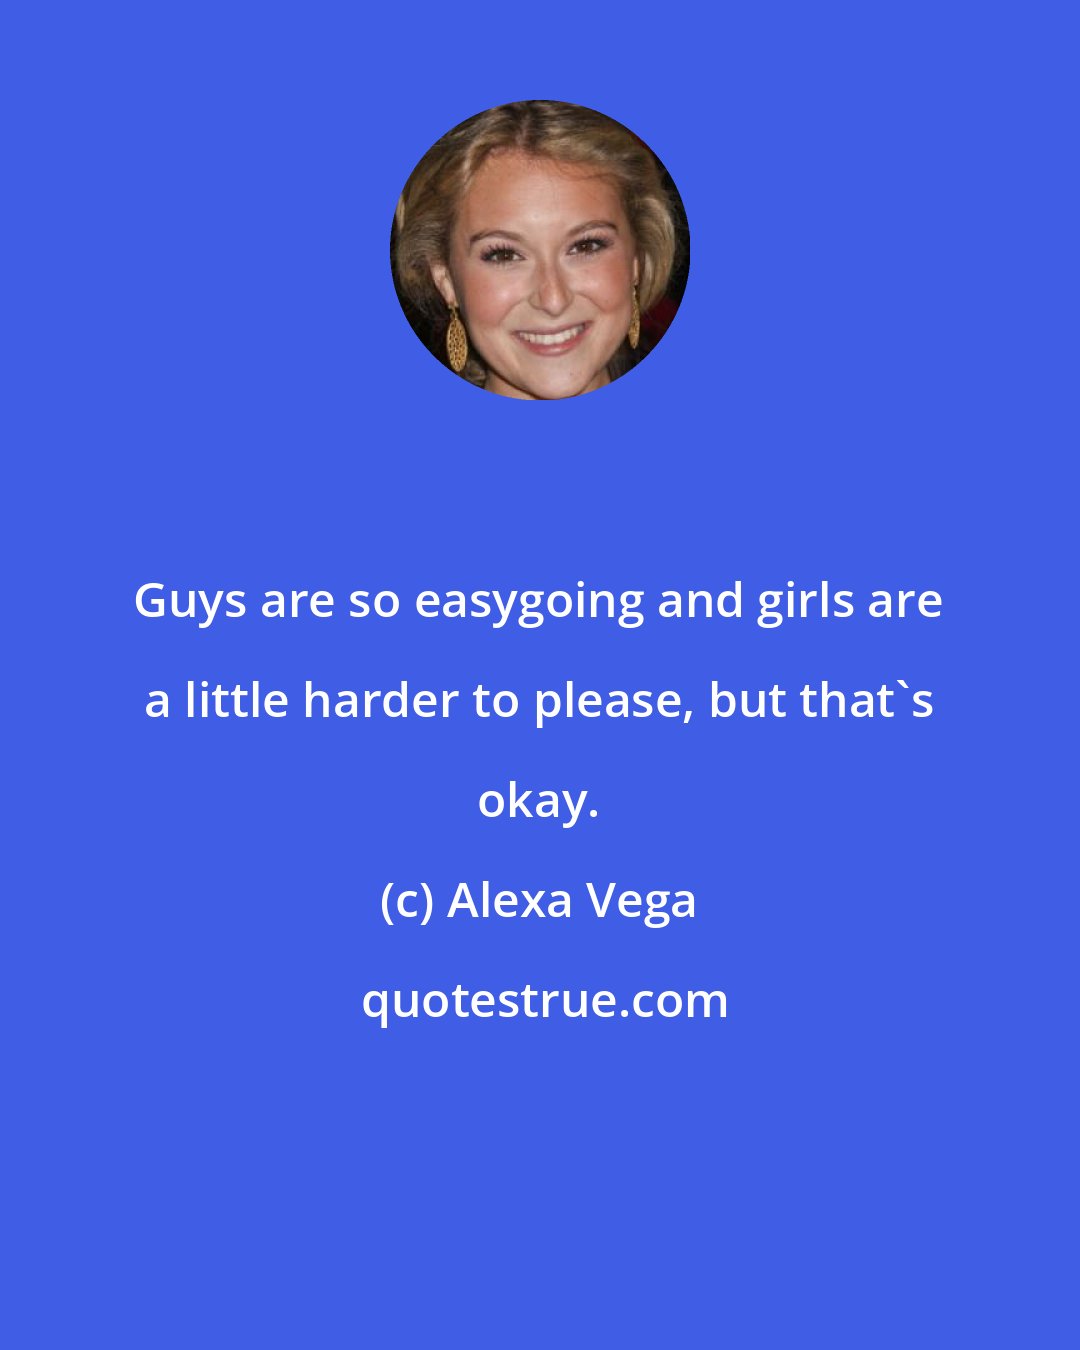 Alexa Vega: Guys are so easygoing and girls are a little harder to please, but that's okay.